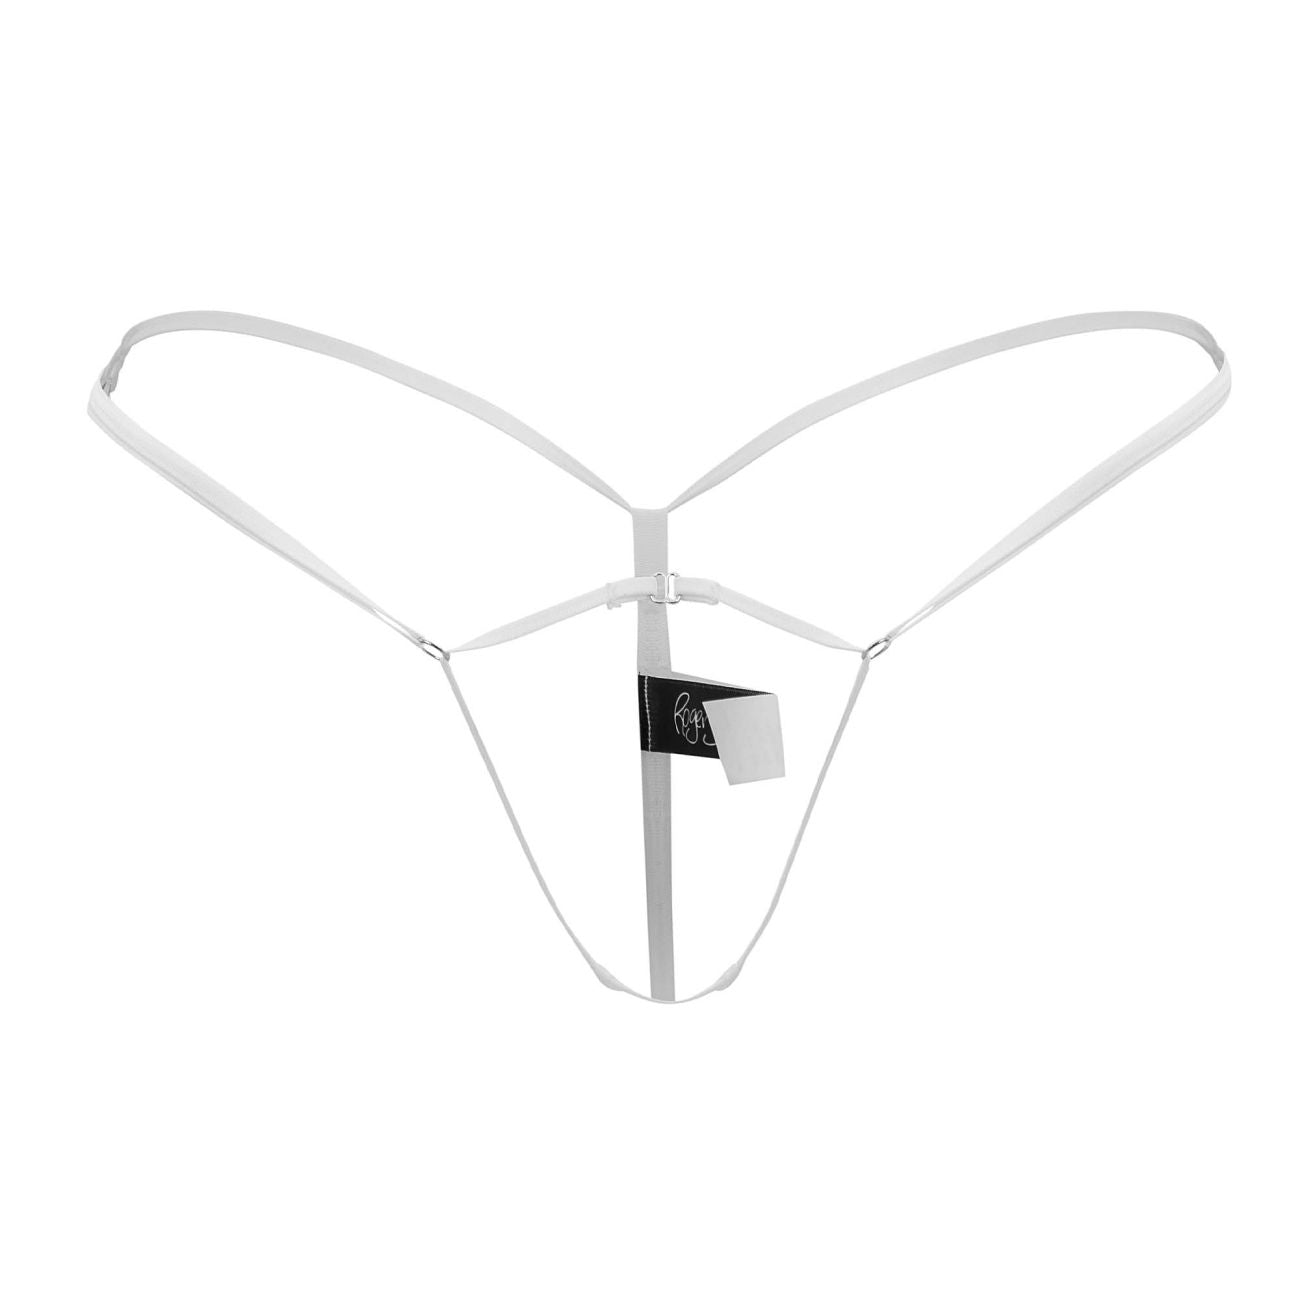 Roger Smuth RS068 Thong White